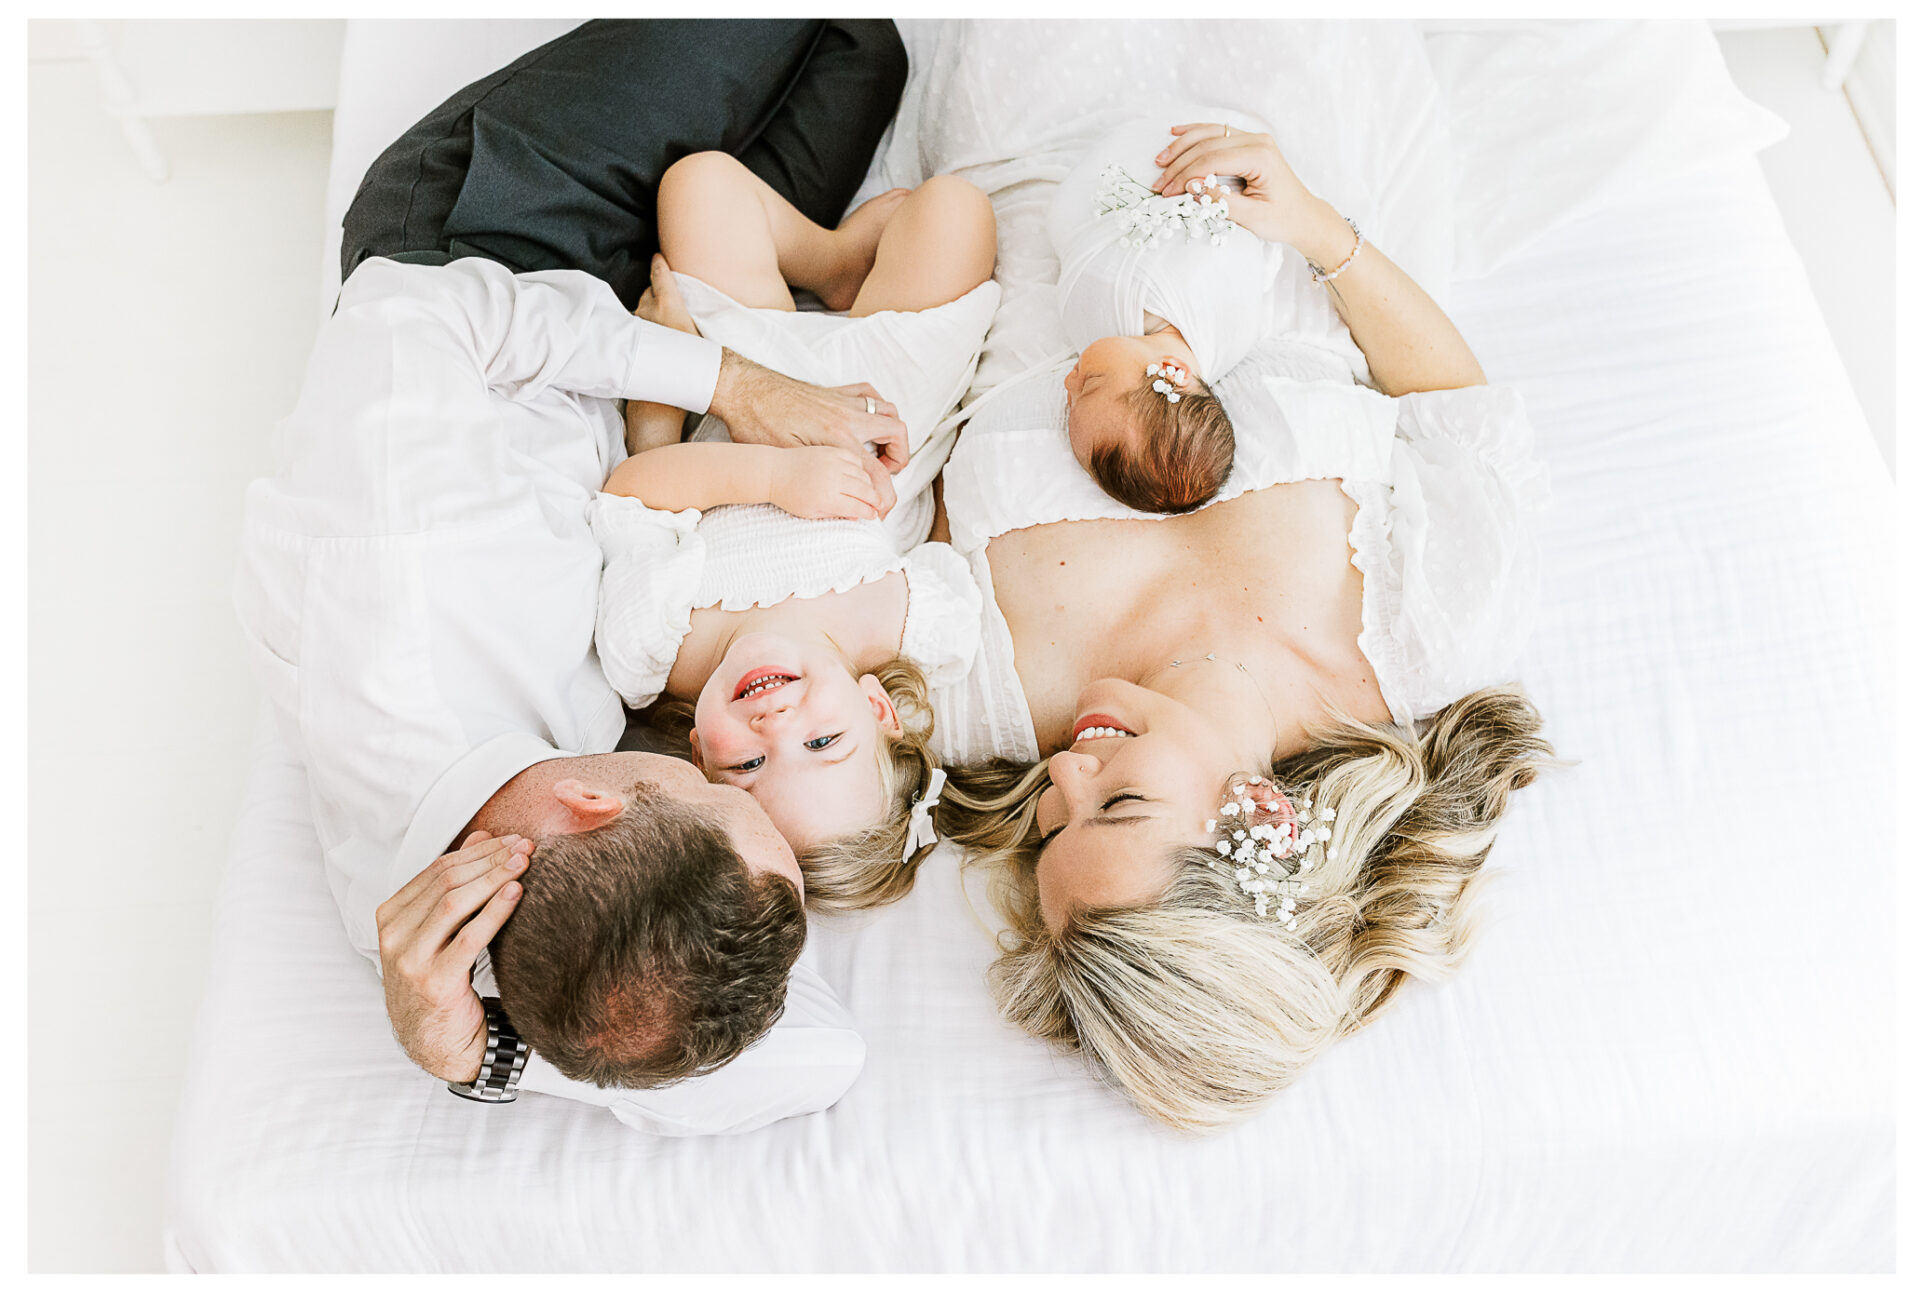 Winter Freire Photography | Dayton, Ohio Newborn Session | Family snuggling together on a bed